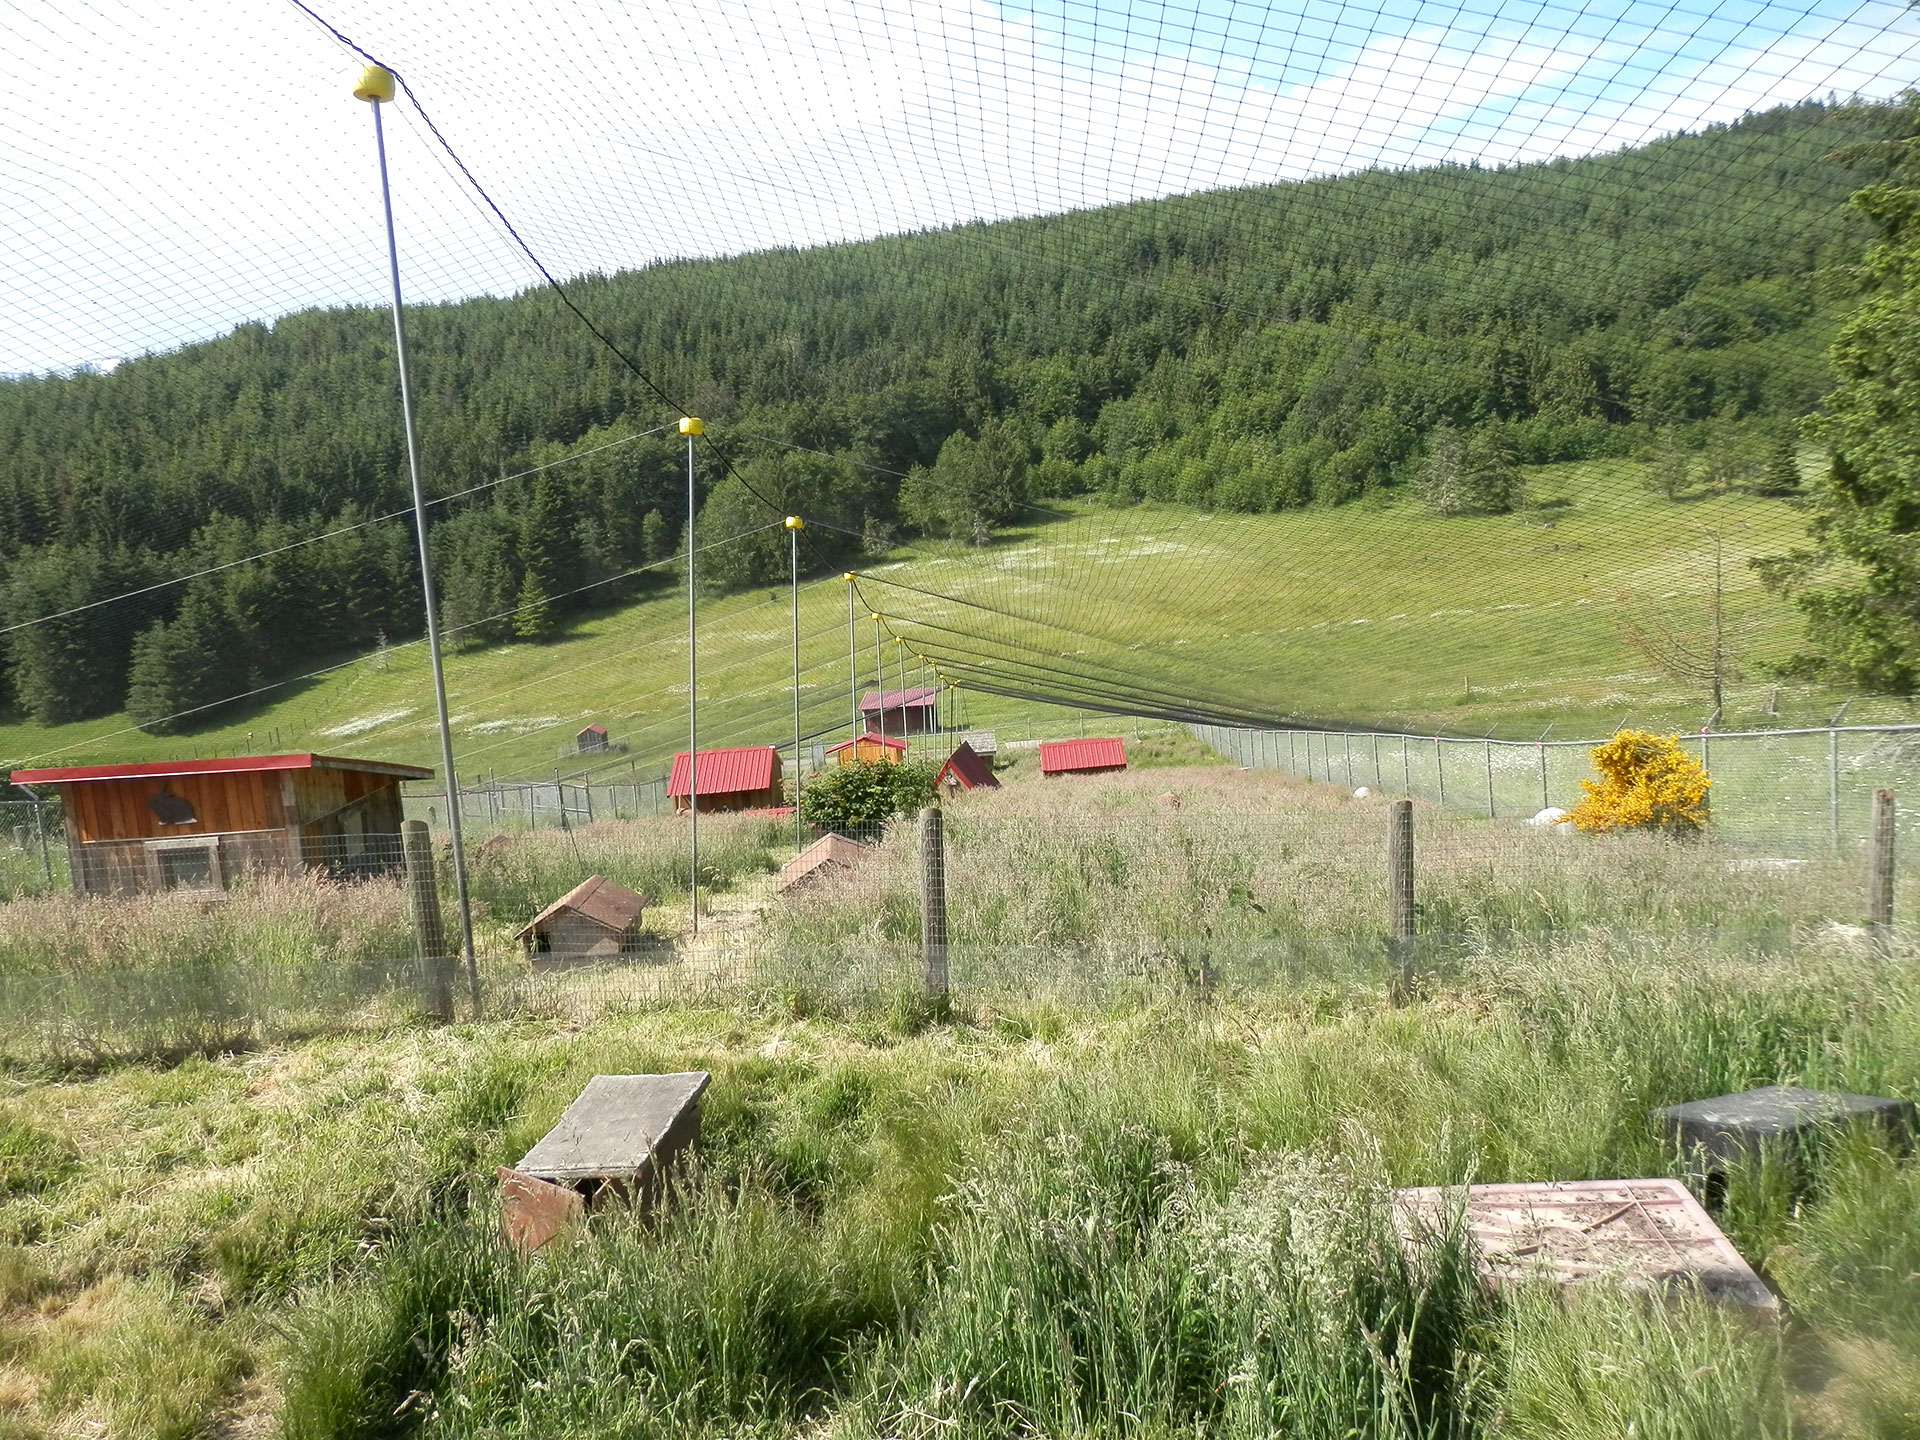 View of the rabbit enclosure